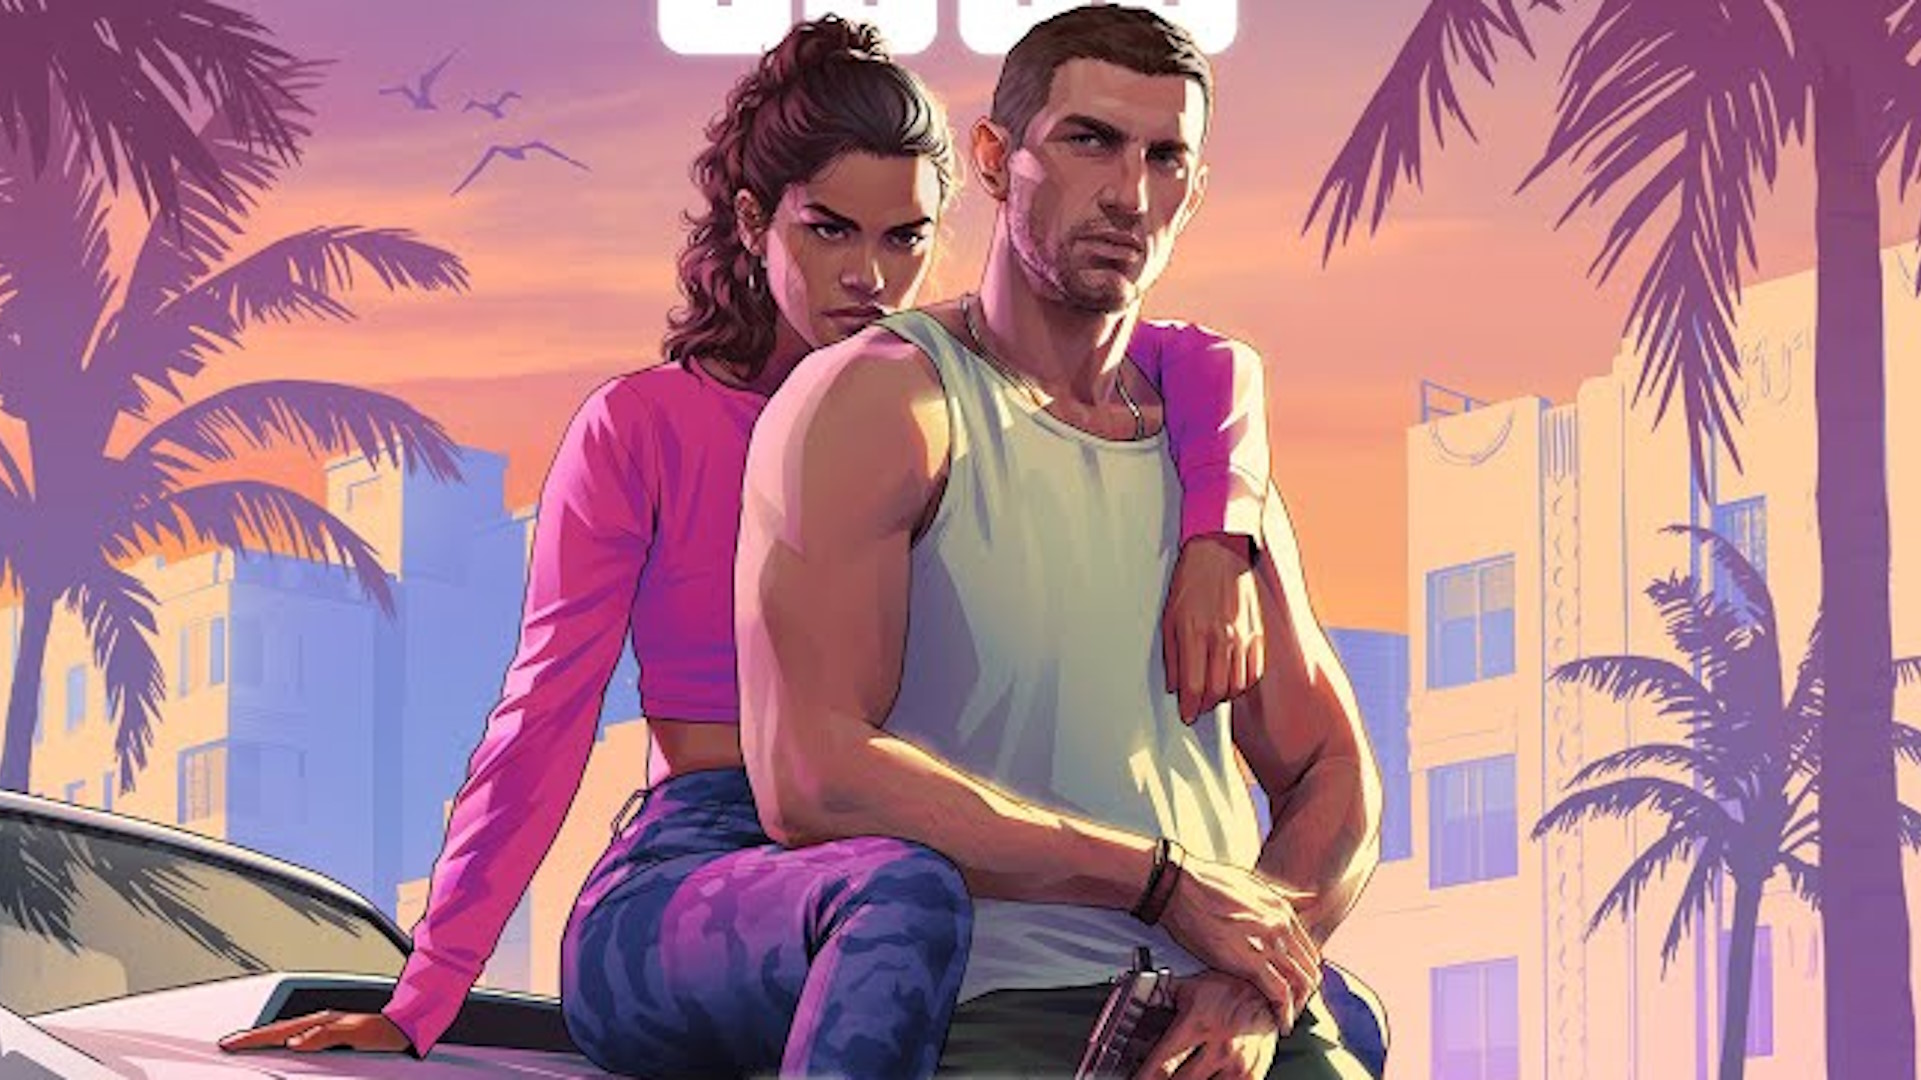  Grand Theft Auto 6 release window narrowed to fall 2025, but there's still no PC launch date confirmed 